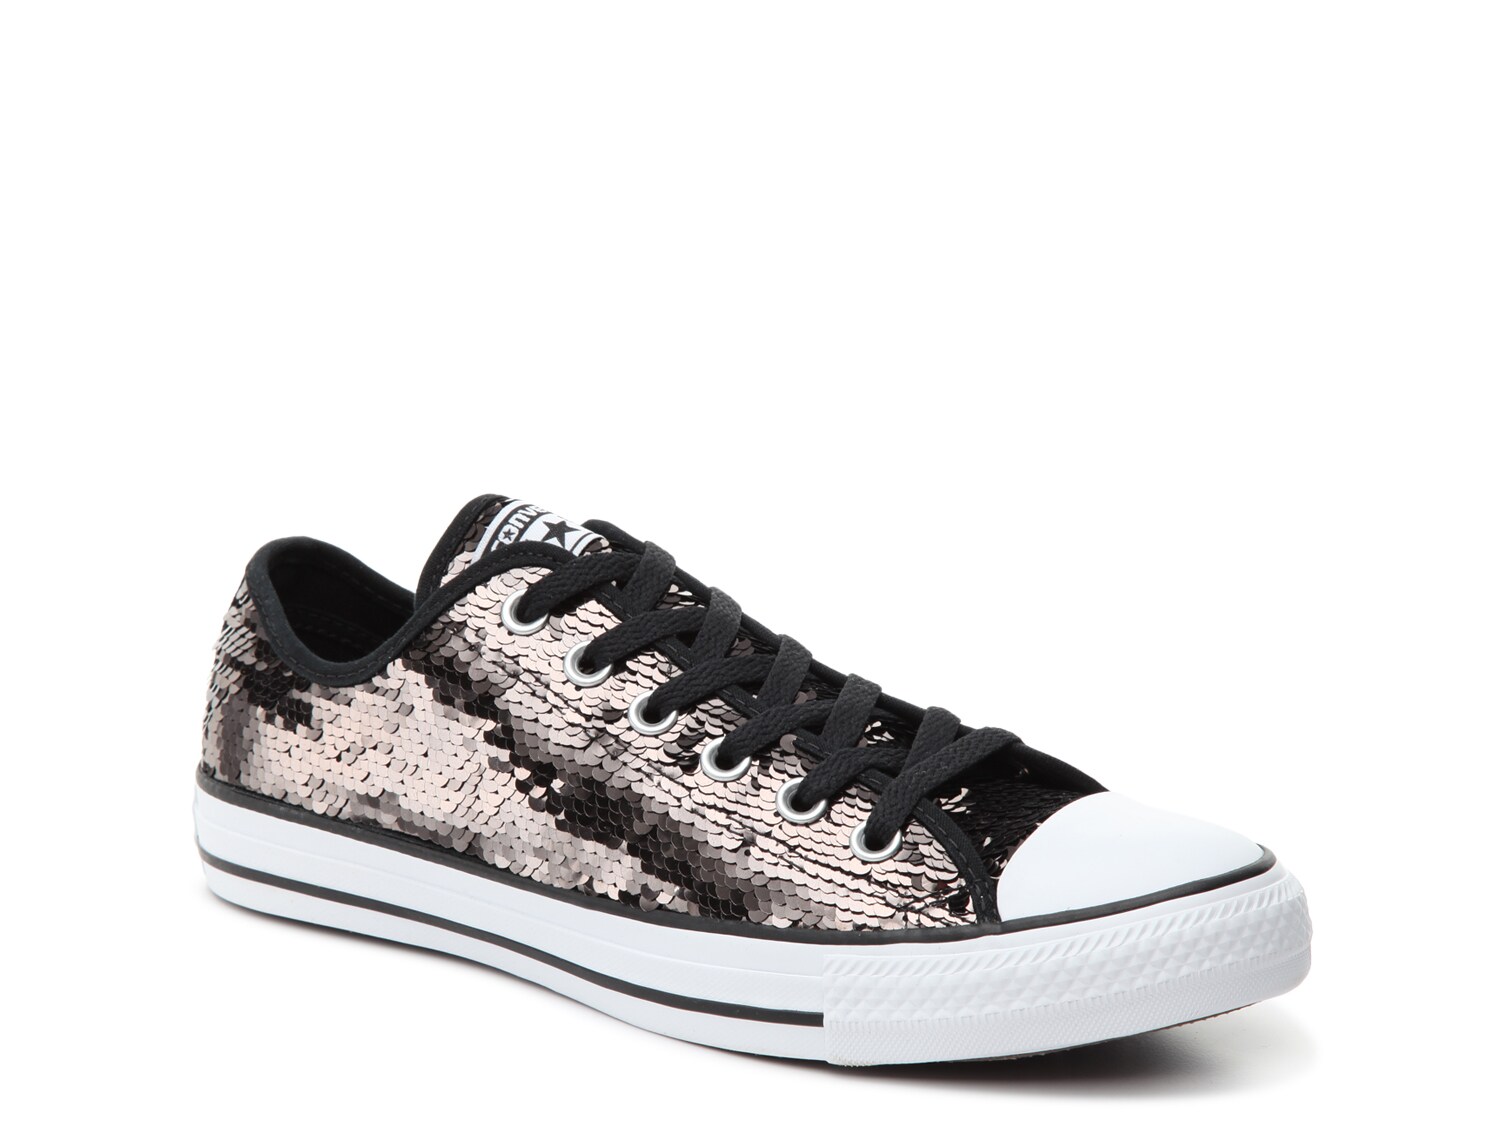 Converse Chuck Taylor All Star Sequins Sneaker - Women's - Free Shipping |  DSW